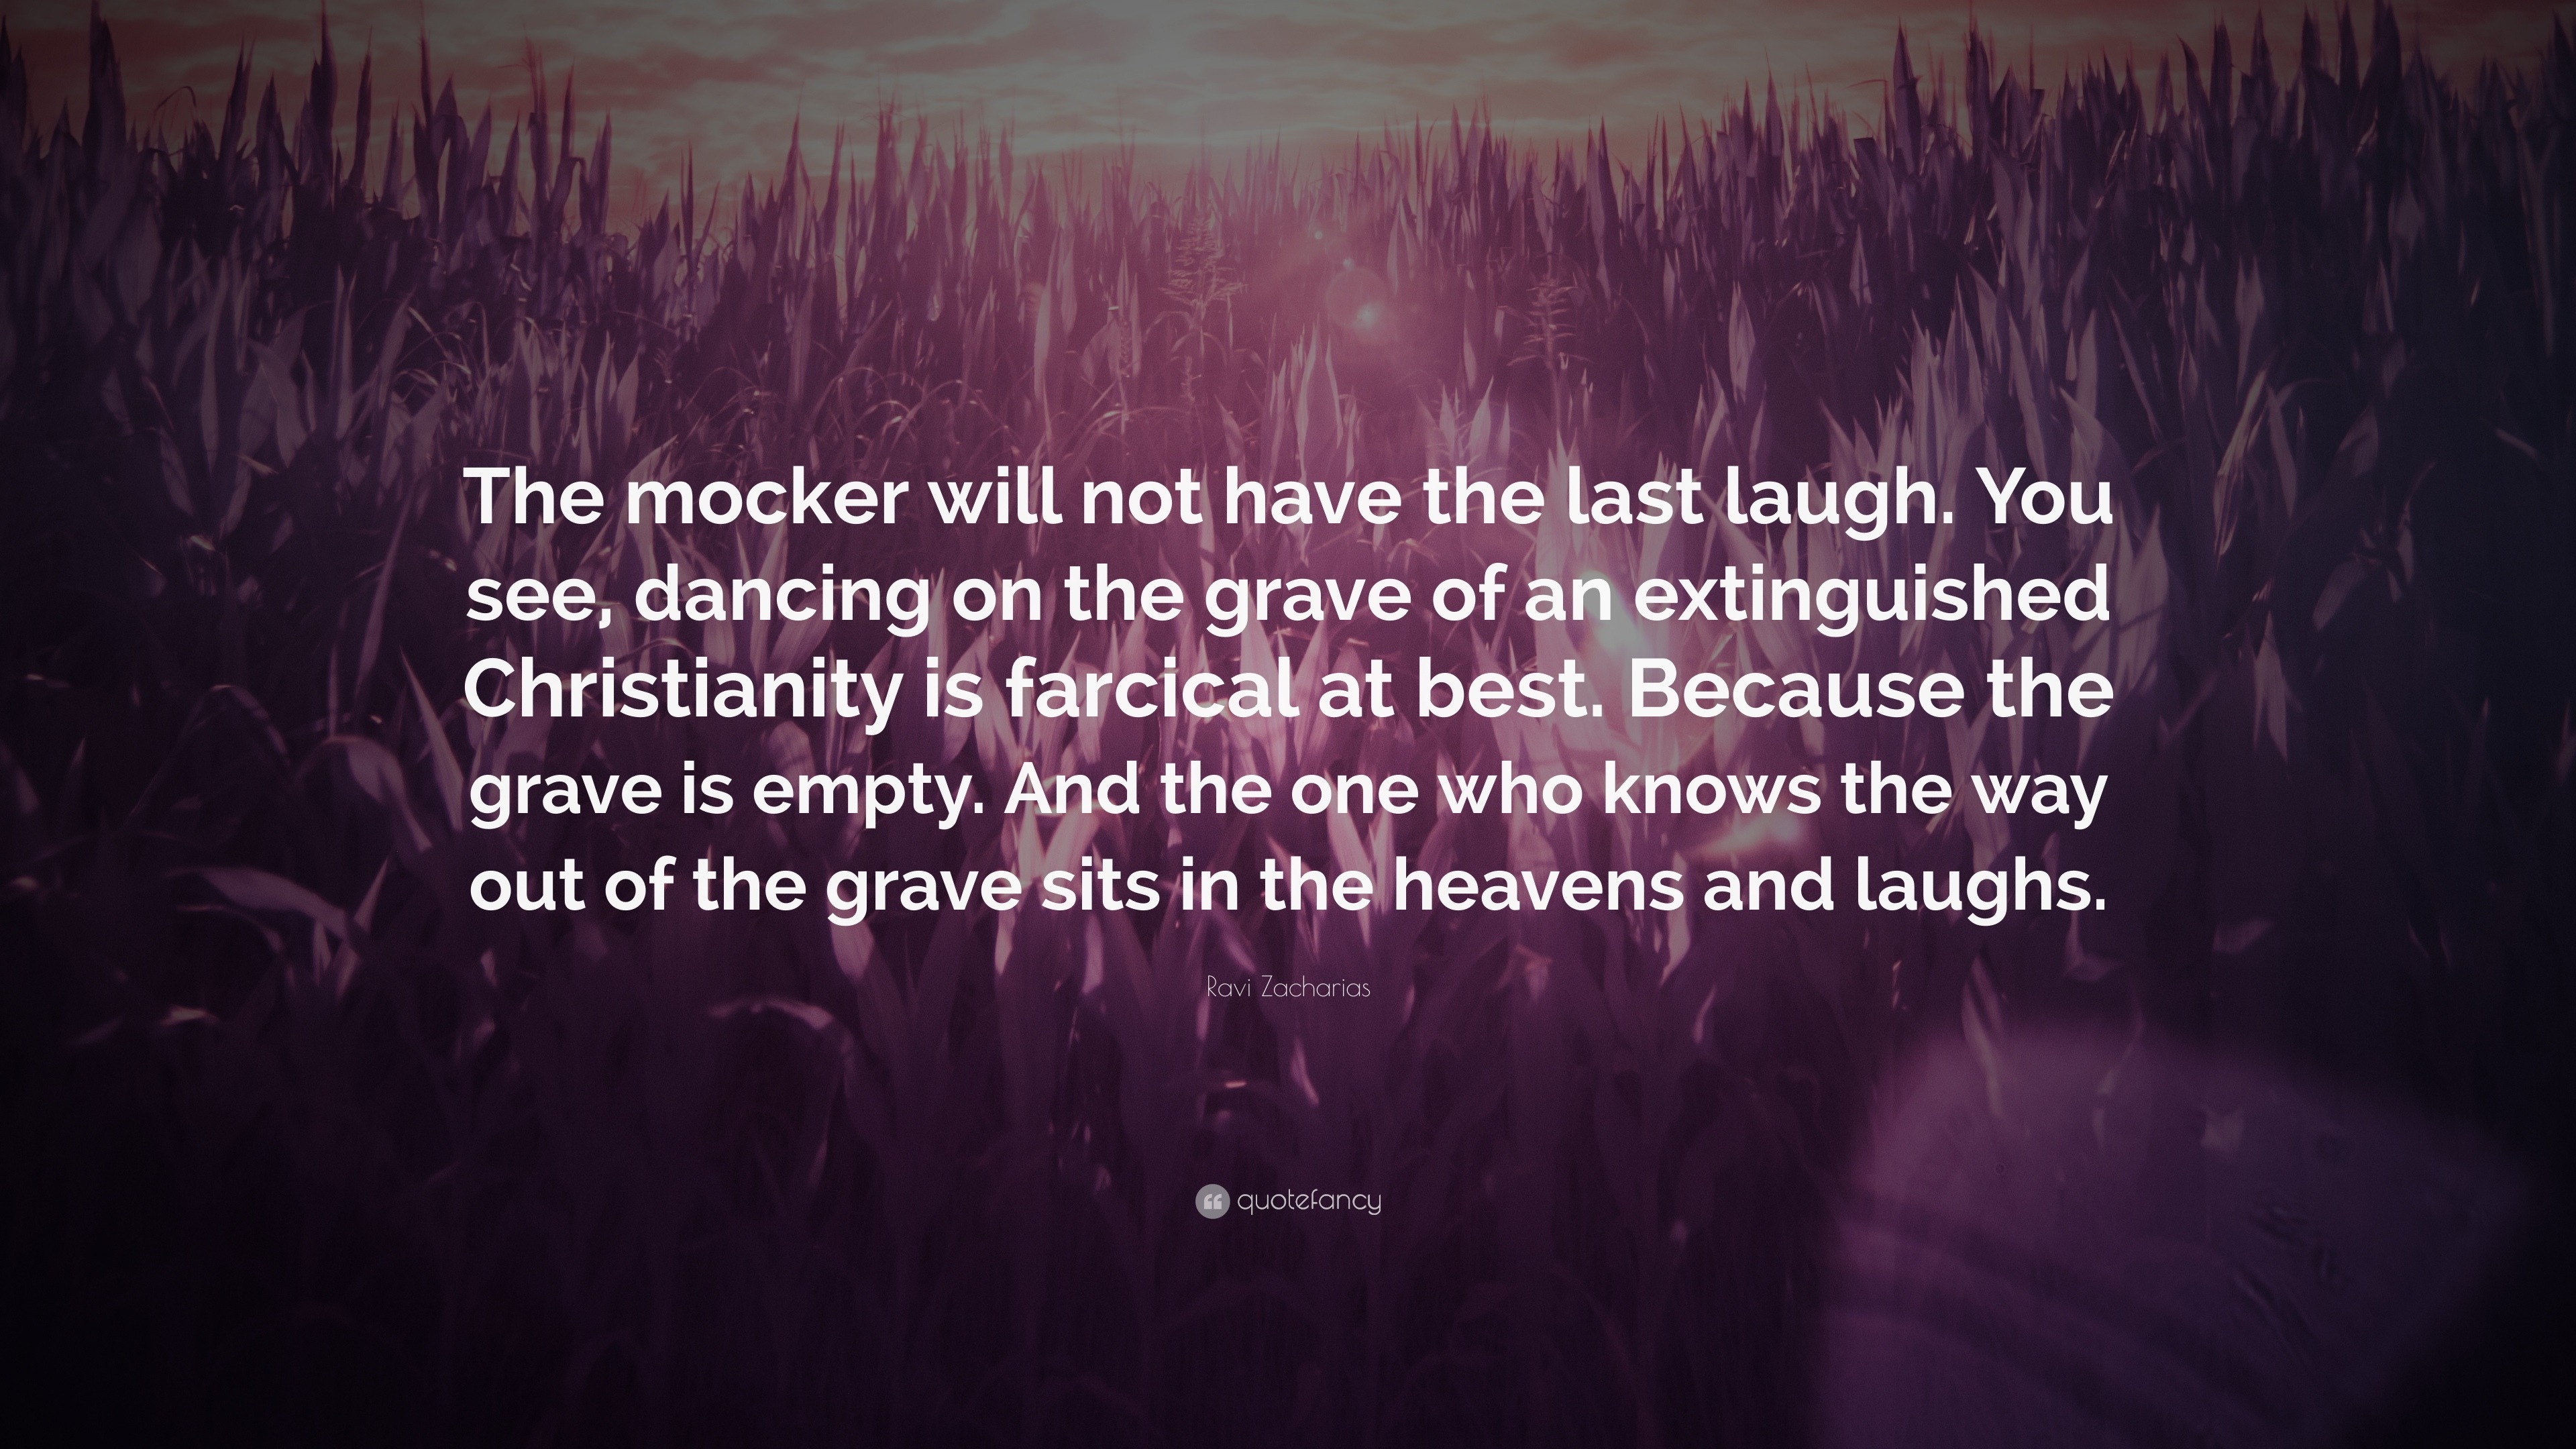 Ravi Zacharias Quote The Mocker Will Not Have The Last Laugh You See Dancing On The Grave Of An Extinguished Christianity Is Farcical At Be 10 Wallpapers Quotefancy